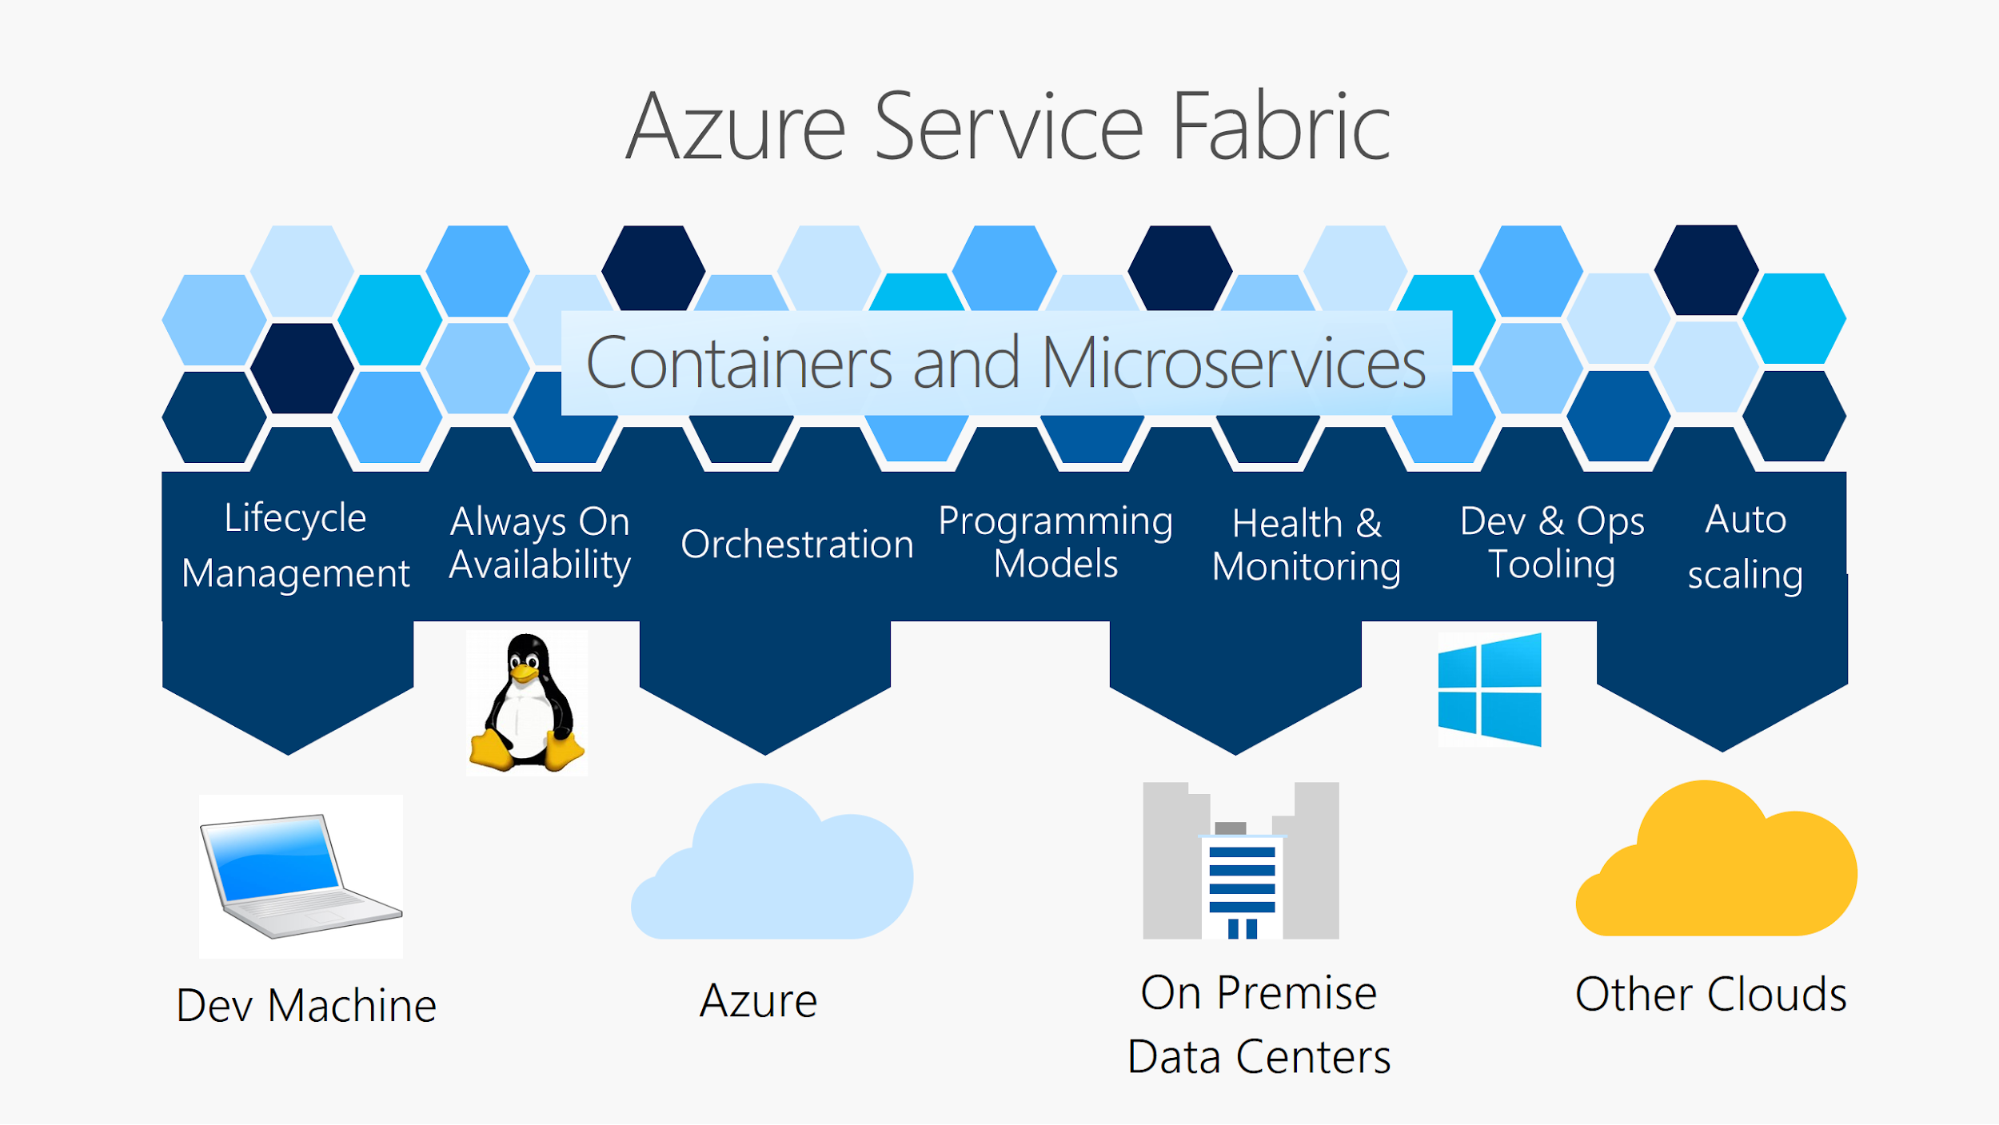 Azure Containers and Microservices